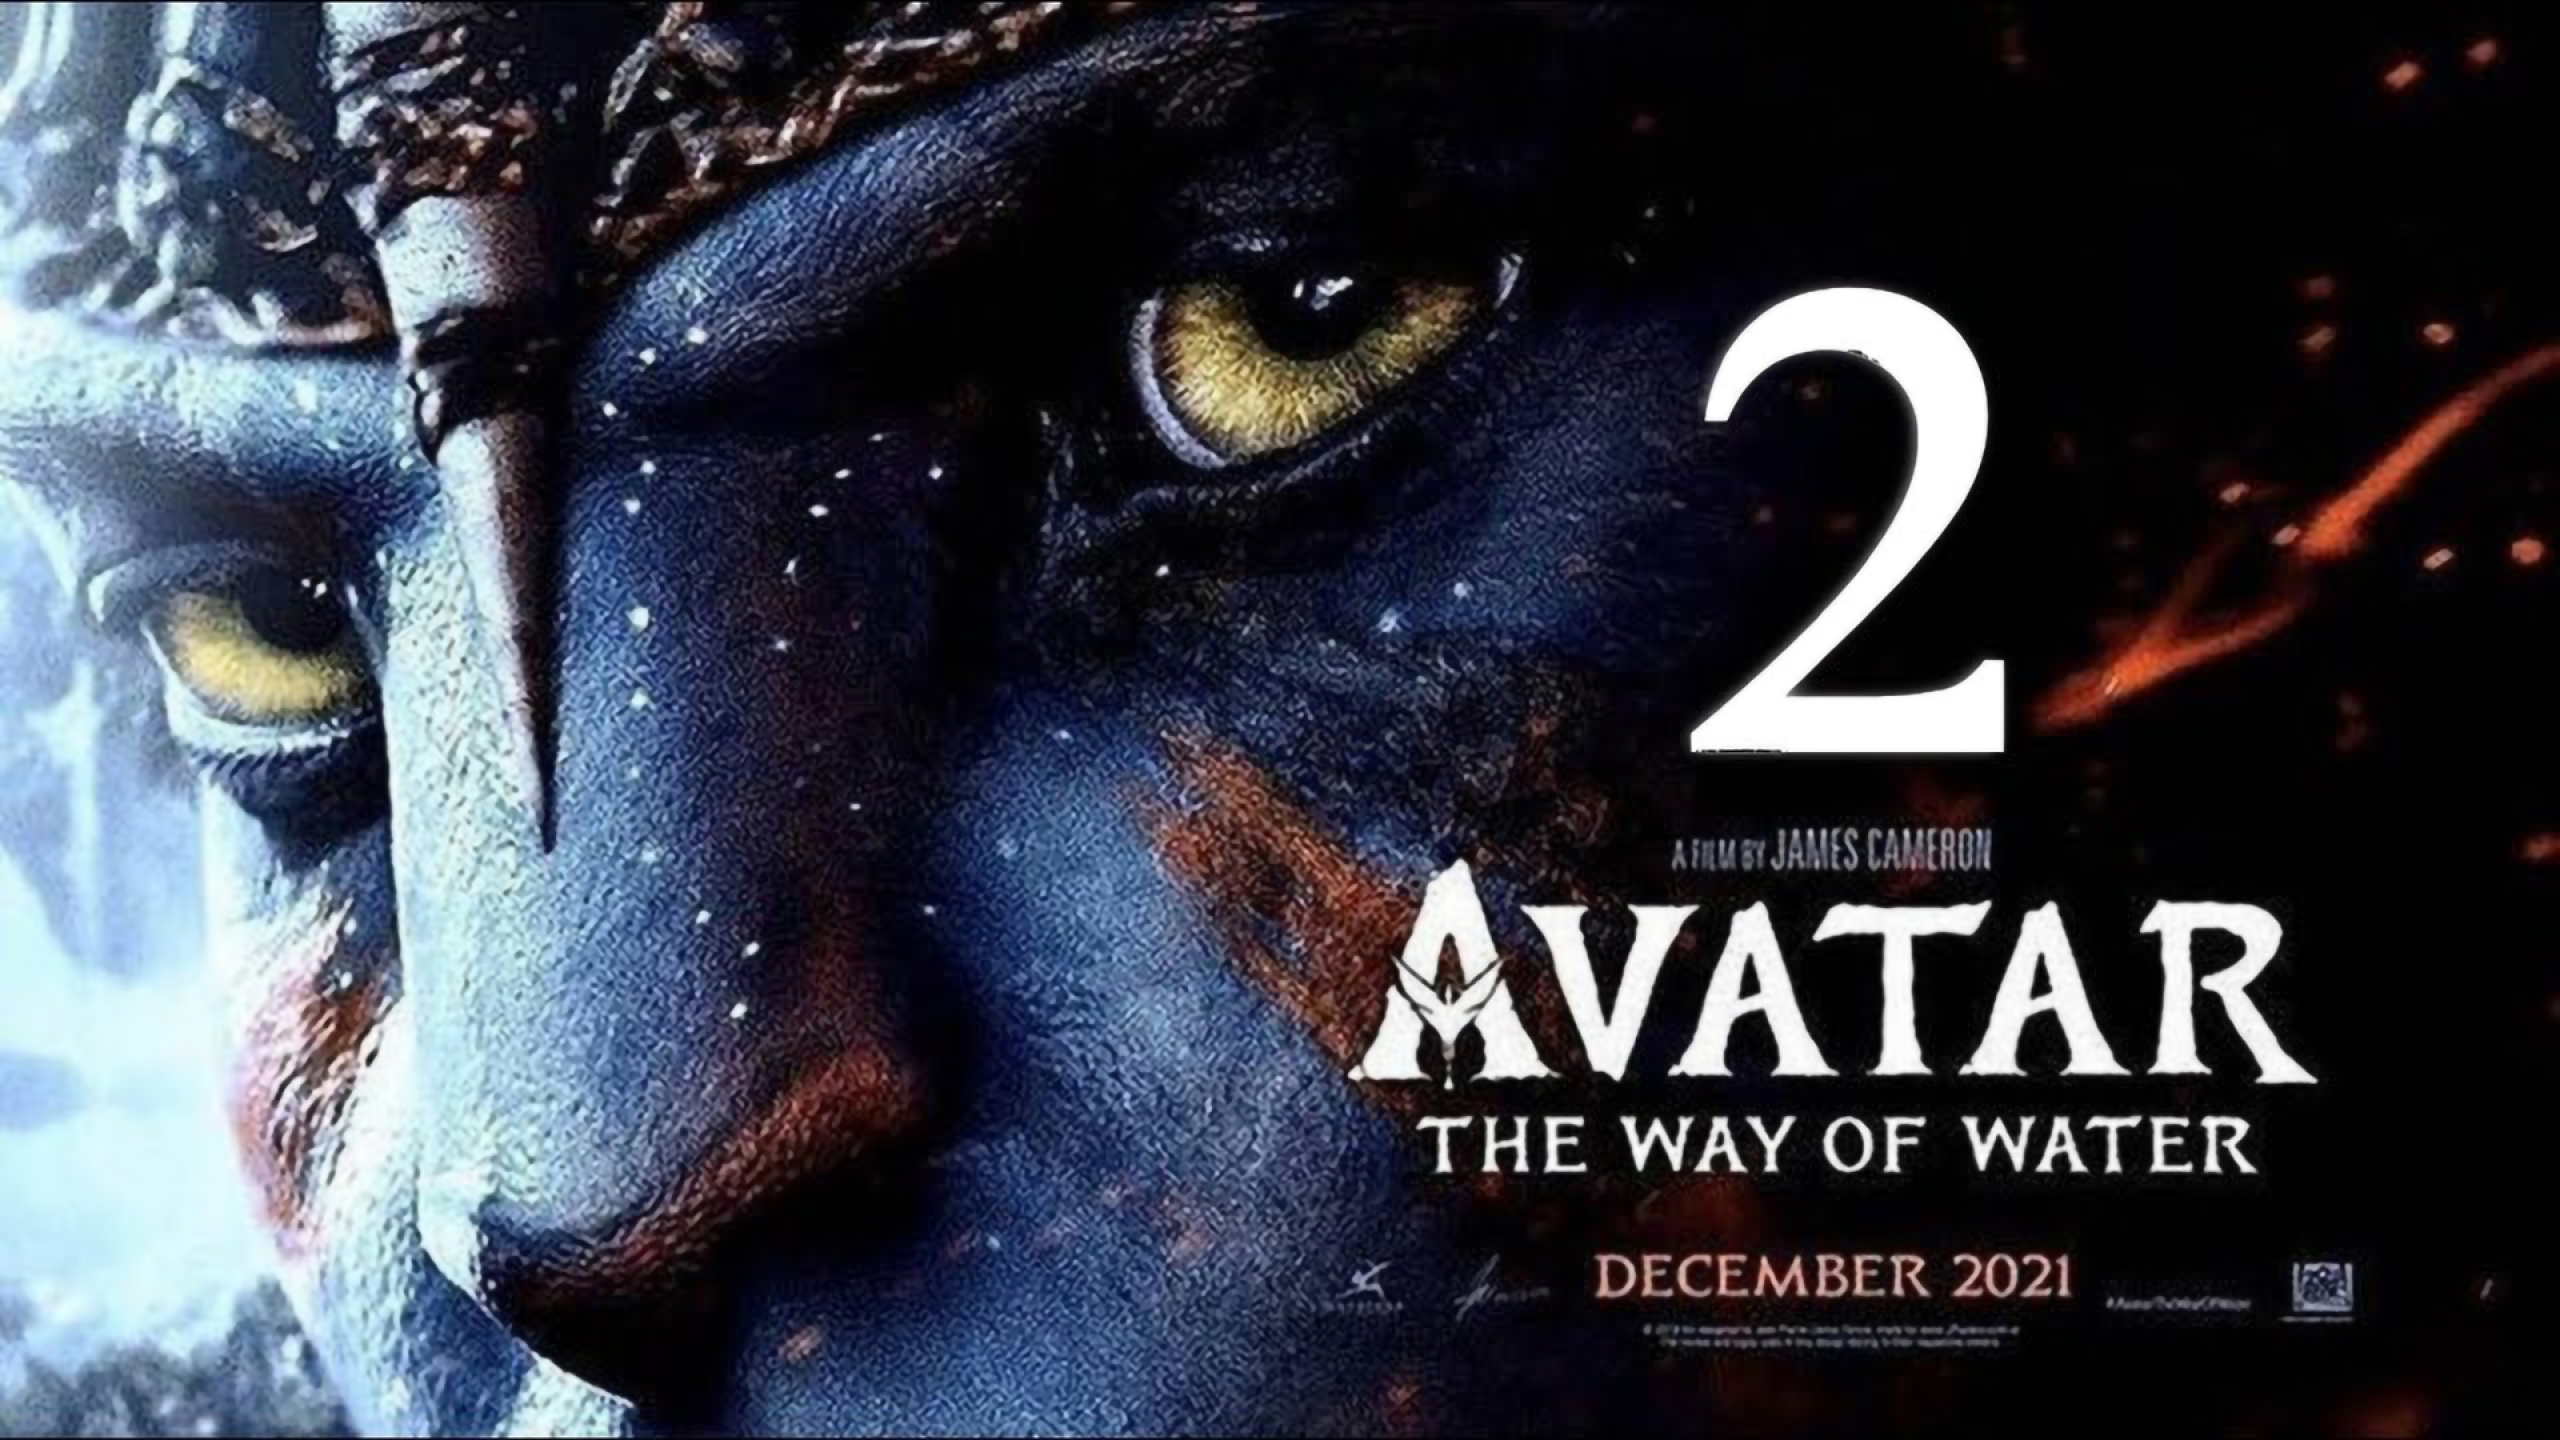 2560x1440 Avatar 2 The Way of Water Banner 1440P Resolution Wallpaper